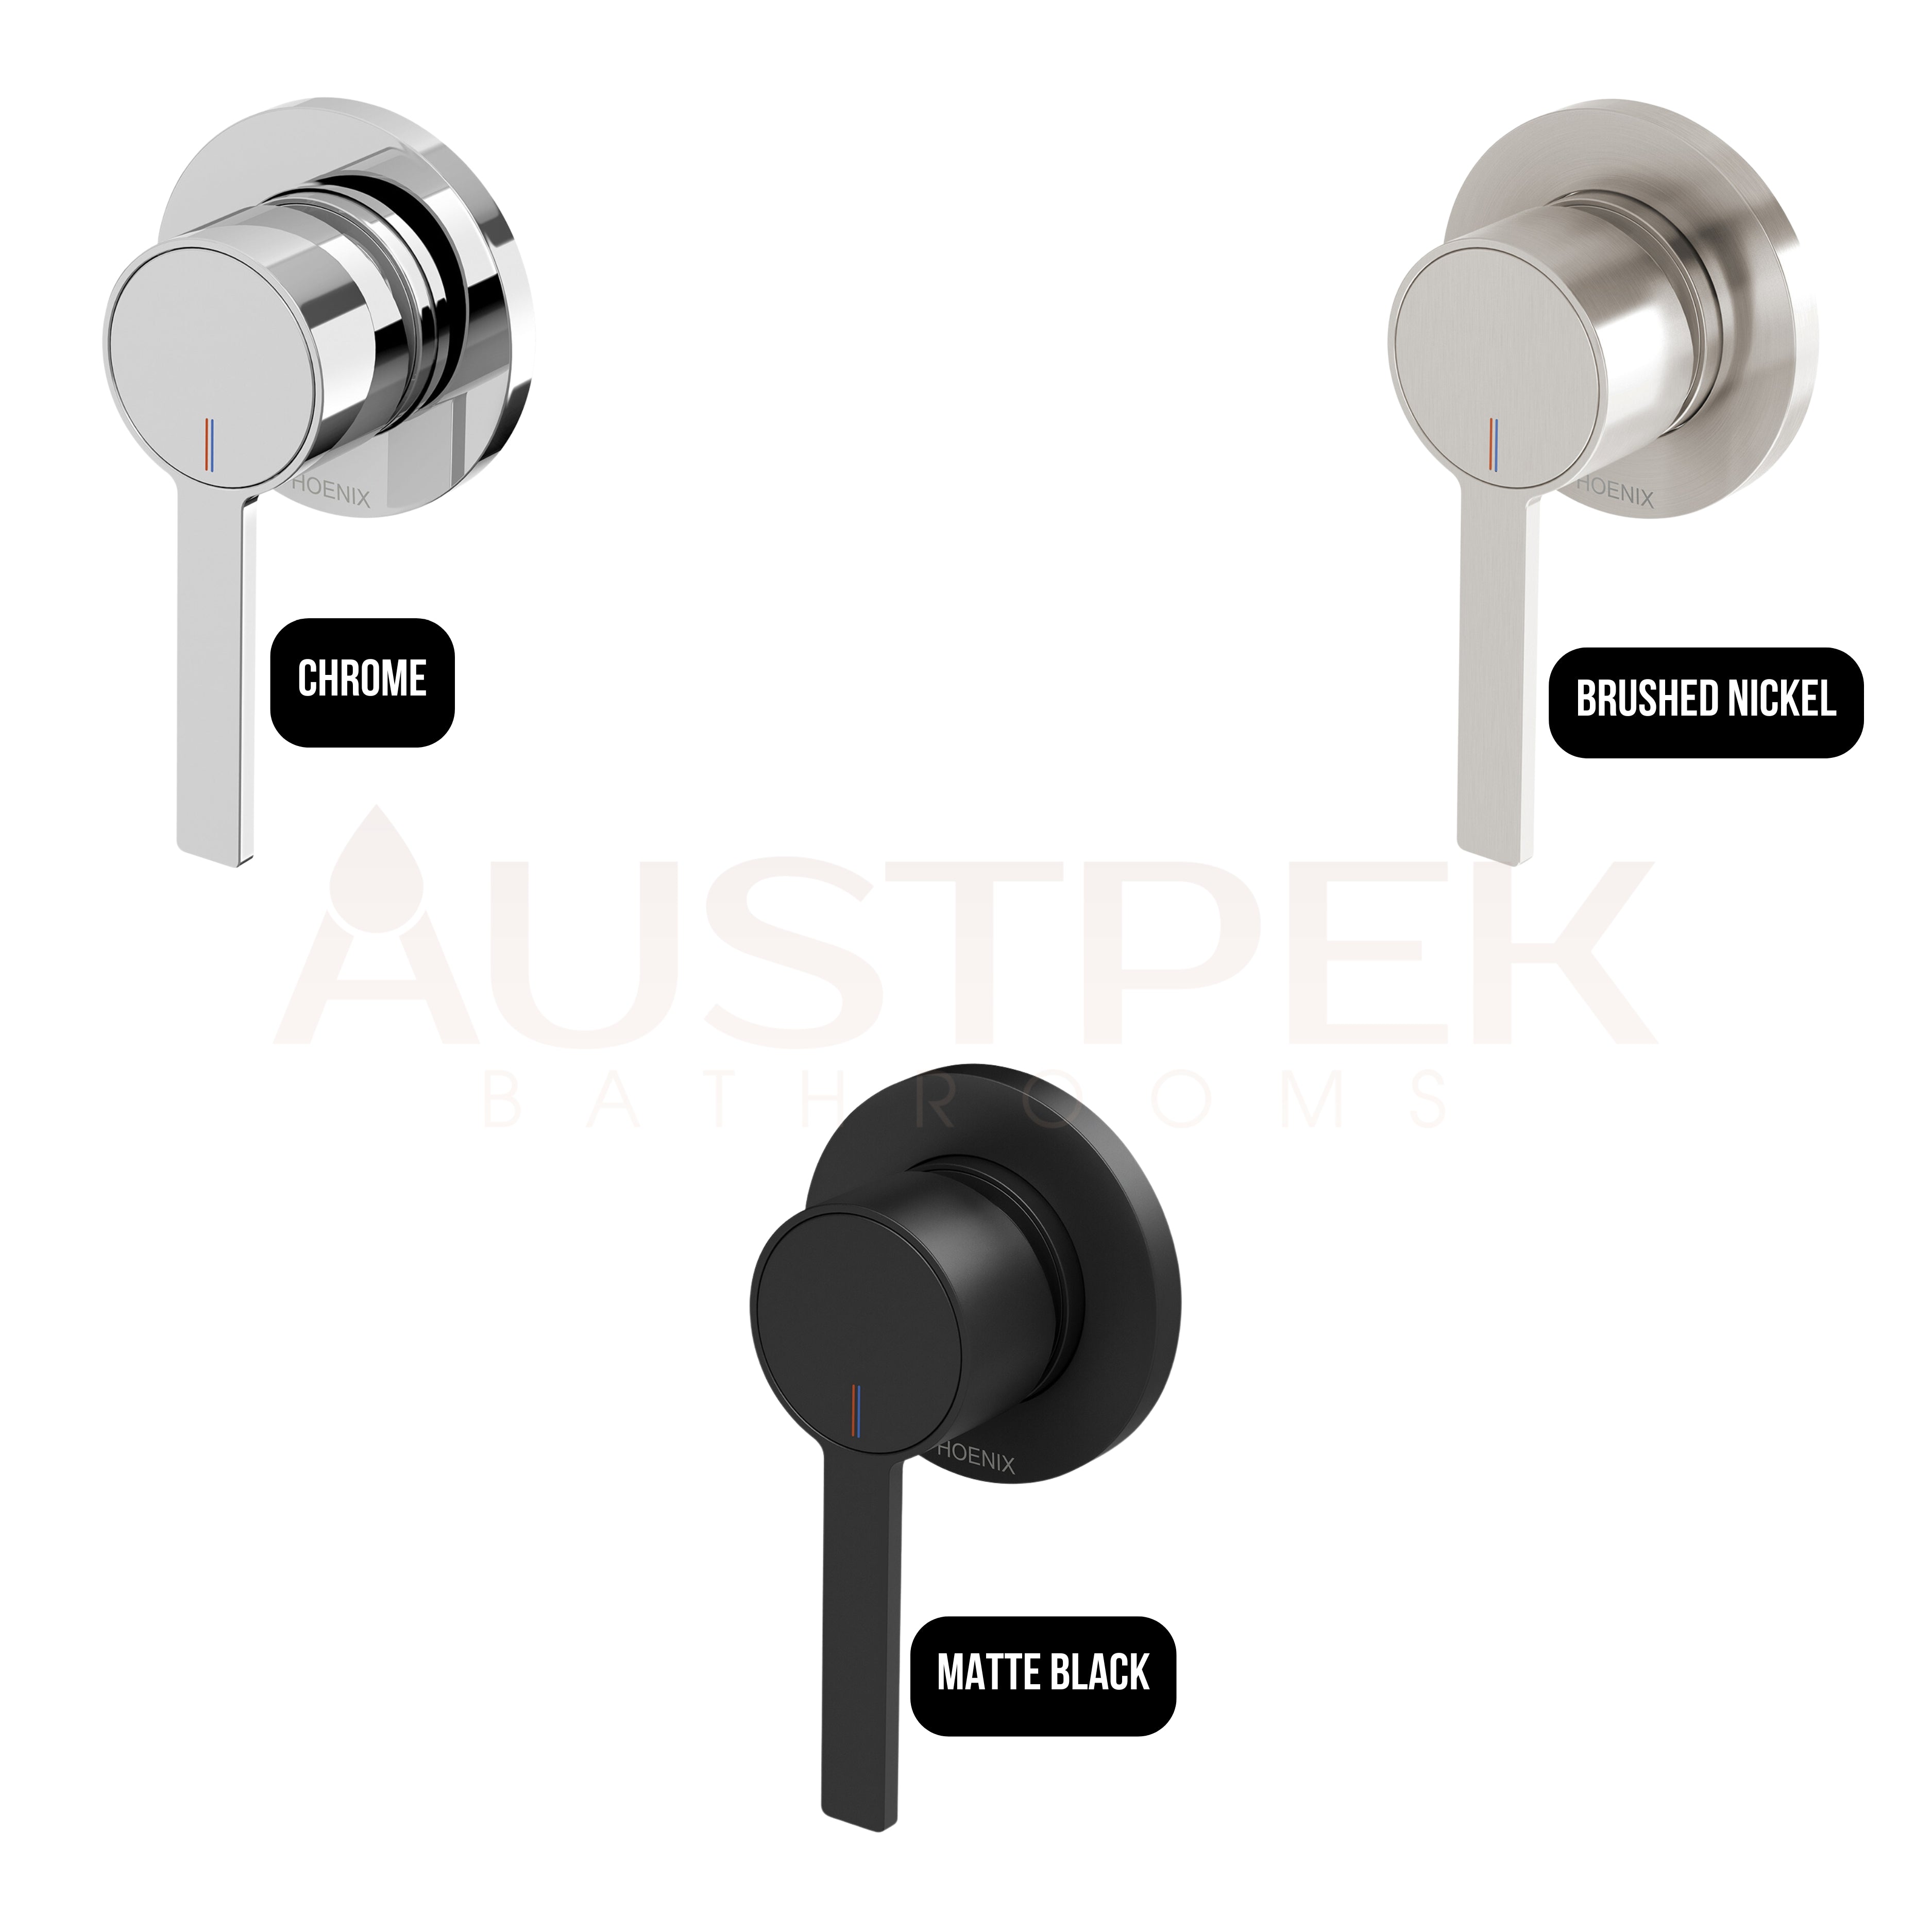 PHOENIX LEXI MKII SWITCHMIX SHOWER / WALL MIXER FIT-OFF AND ROUGH-IN KIT CHROME